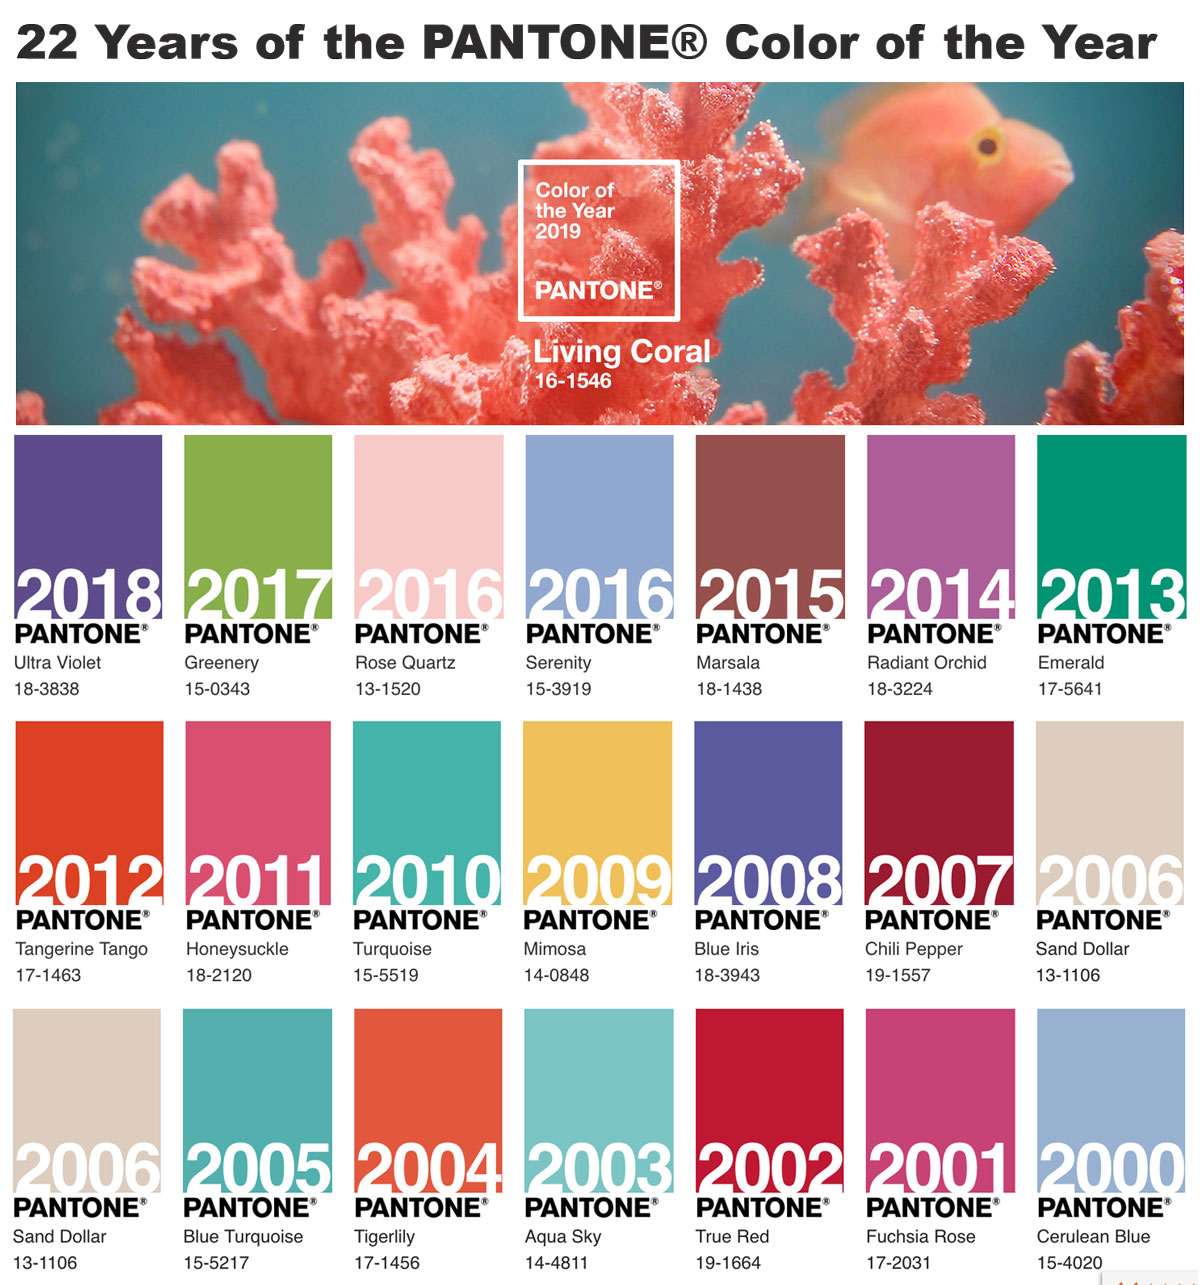 Drumroll, Please! PANTONE’S Color of 2019 is Living Coral Park City